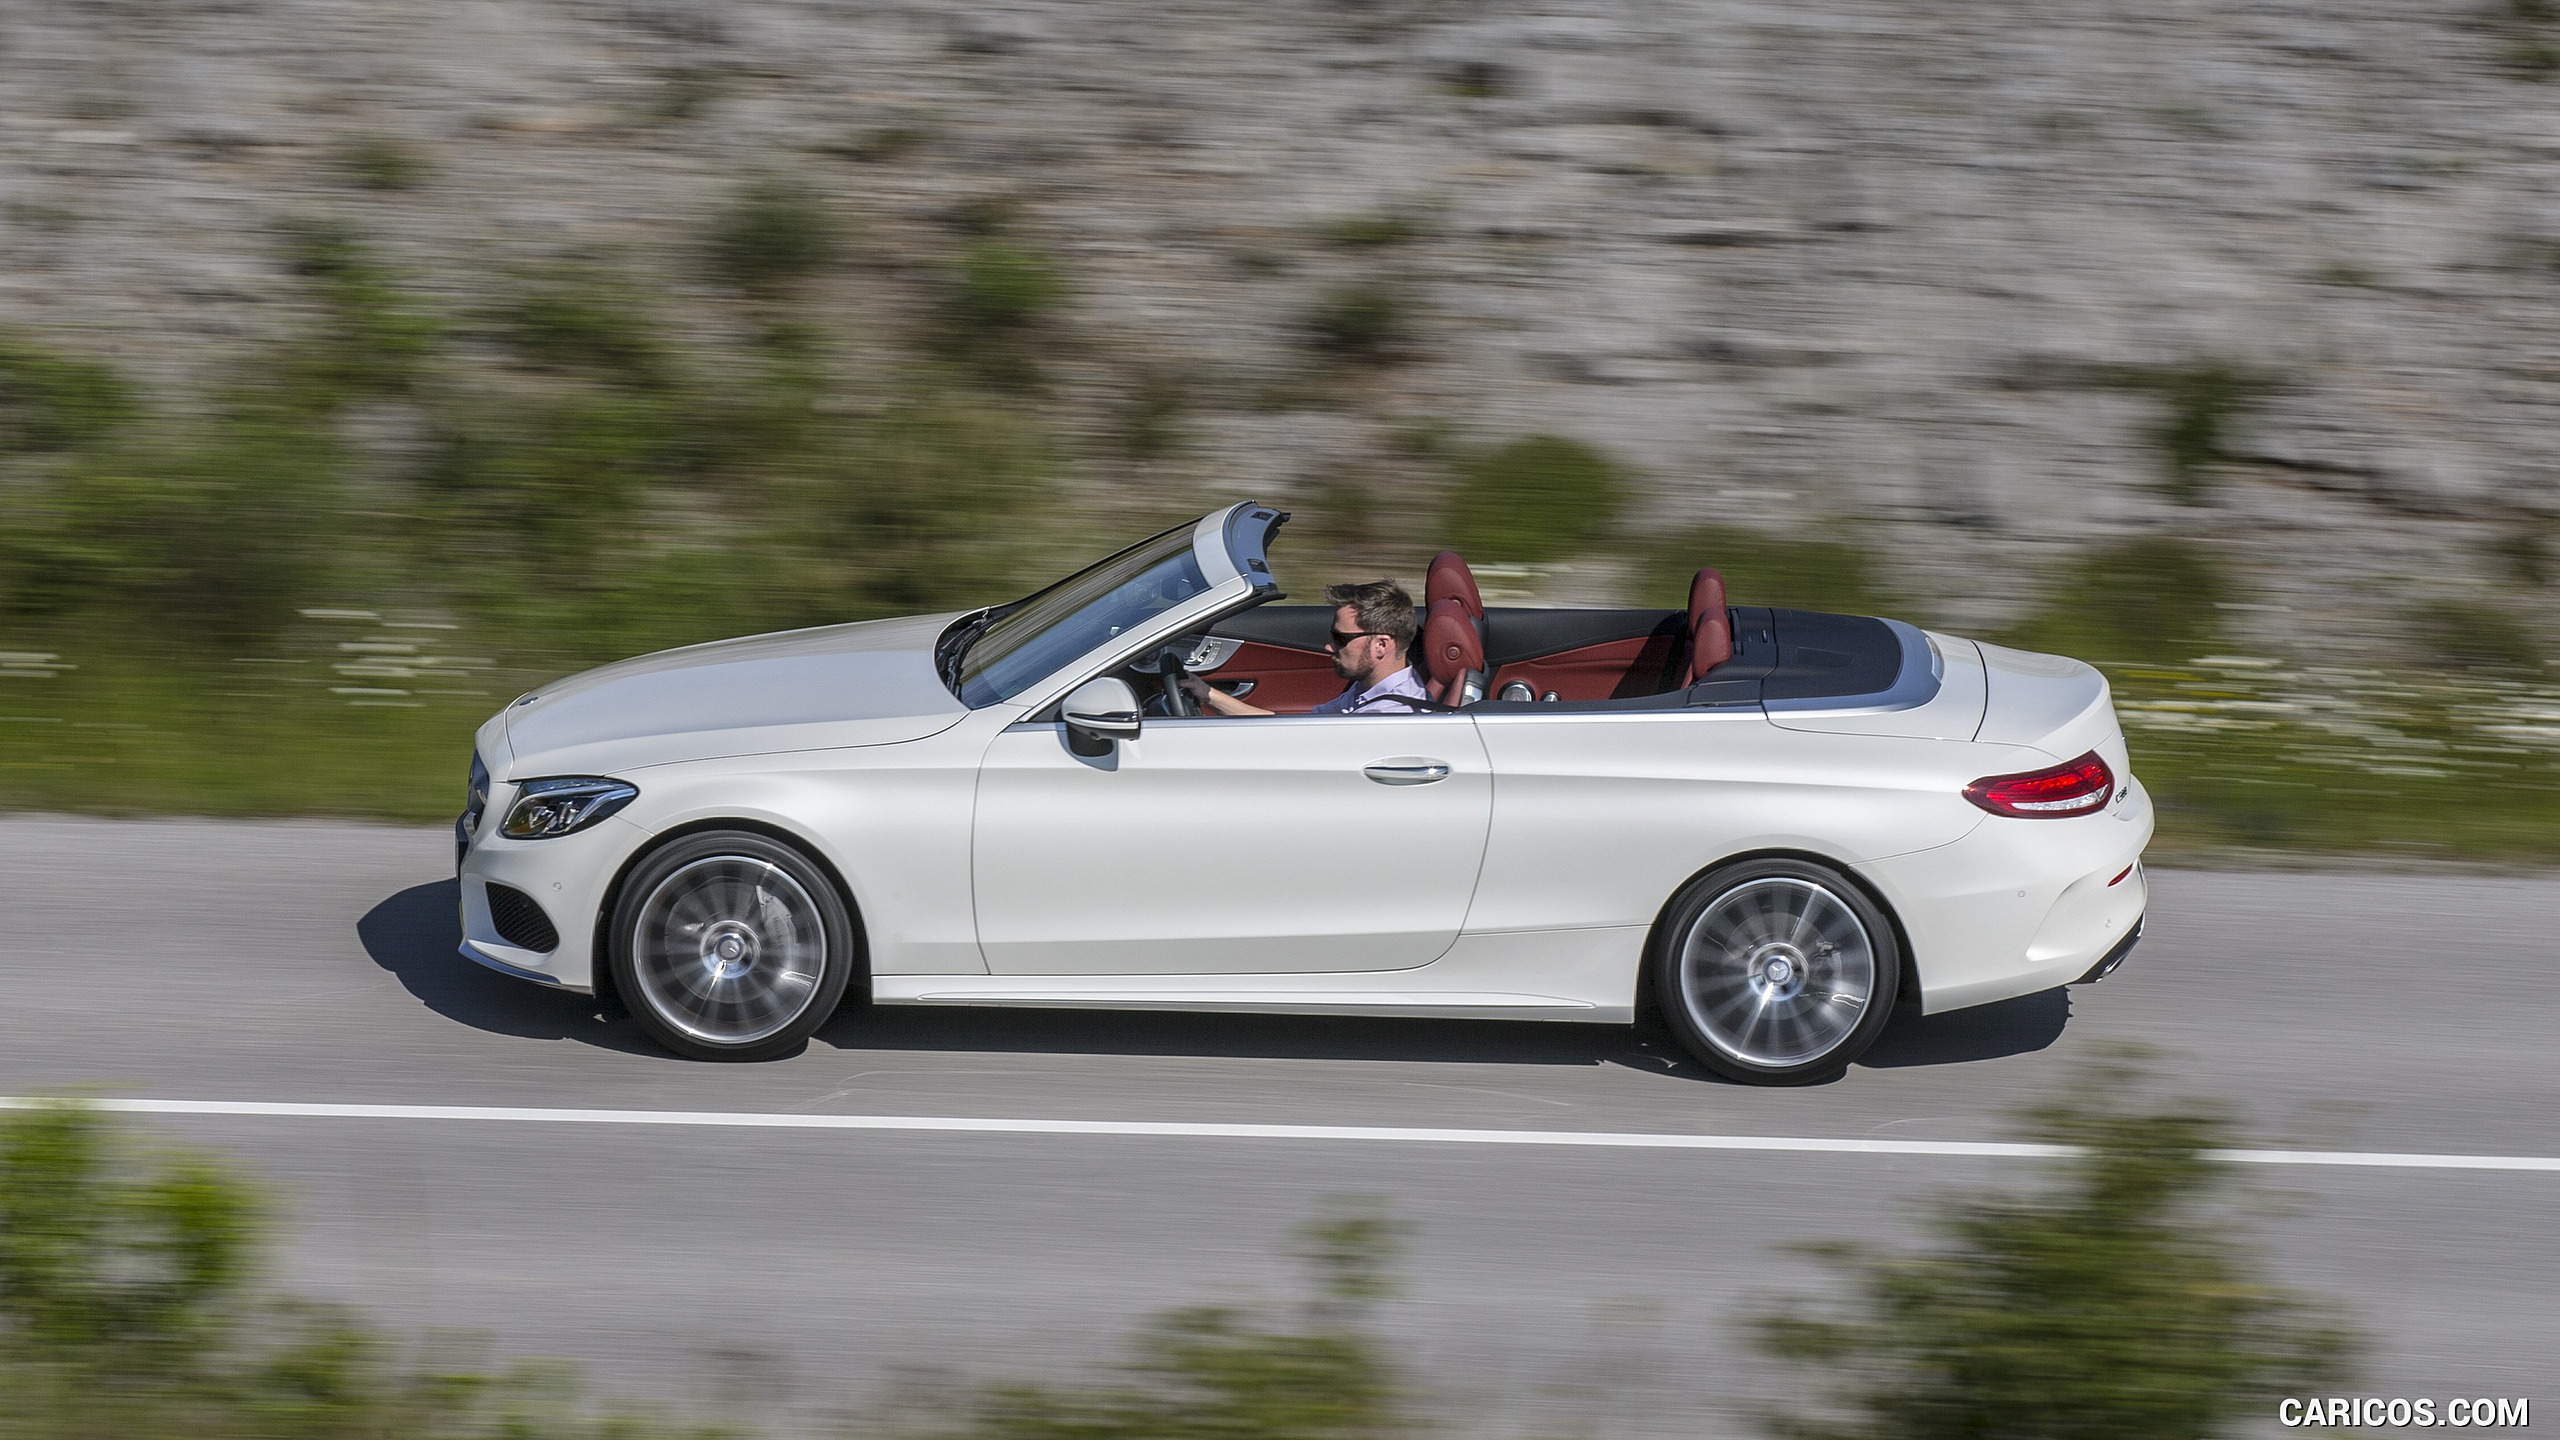 2017 Mercedes-Benz C-Class C300 Cabriolet - Side, #45 of 96